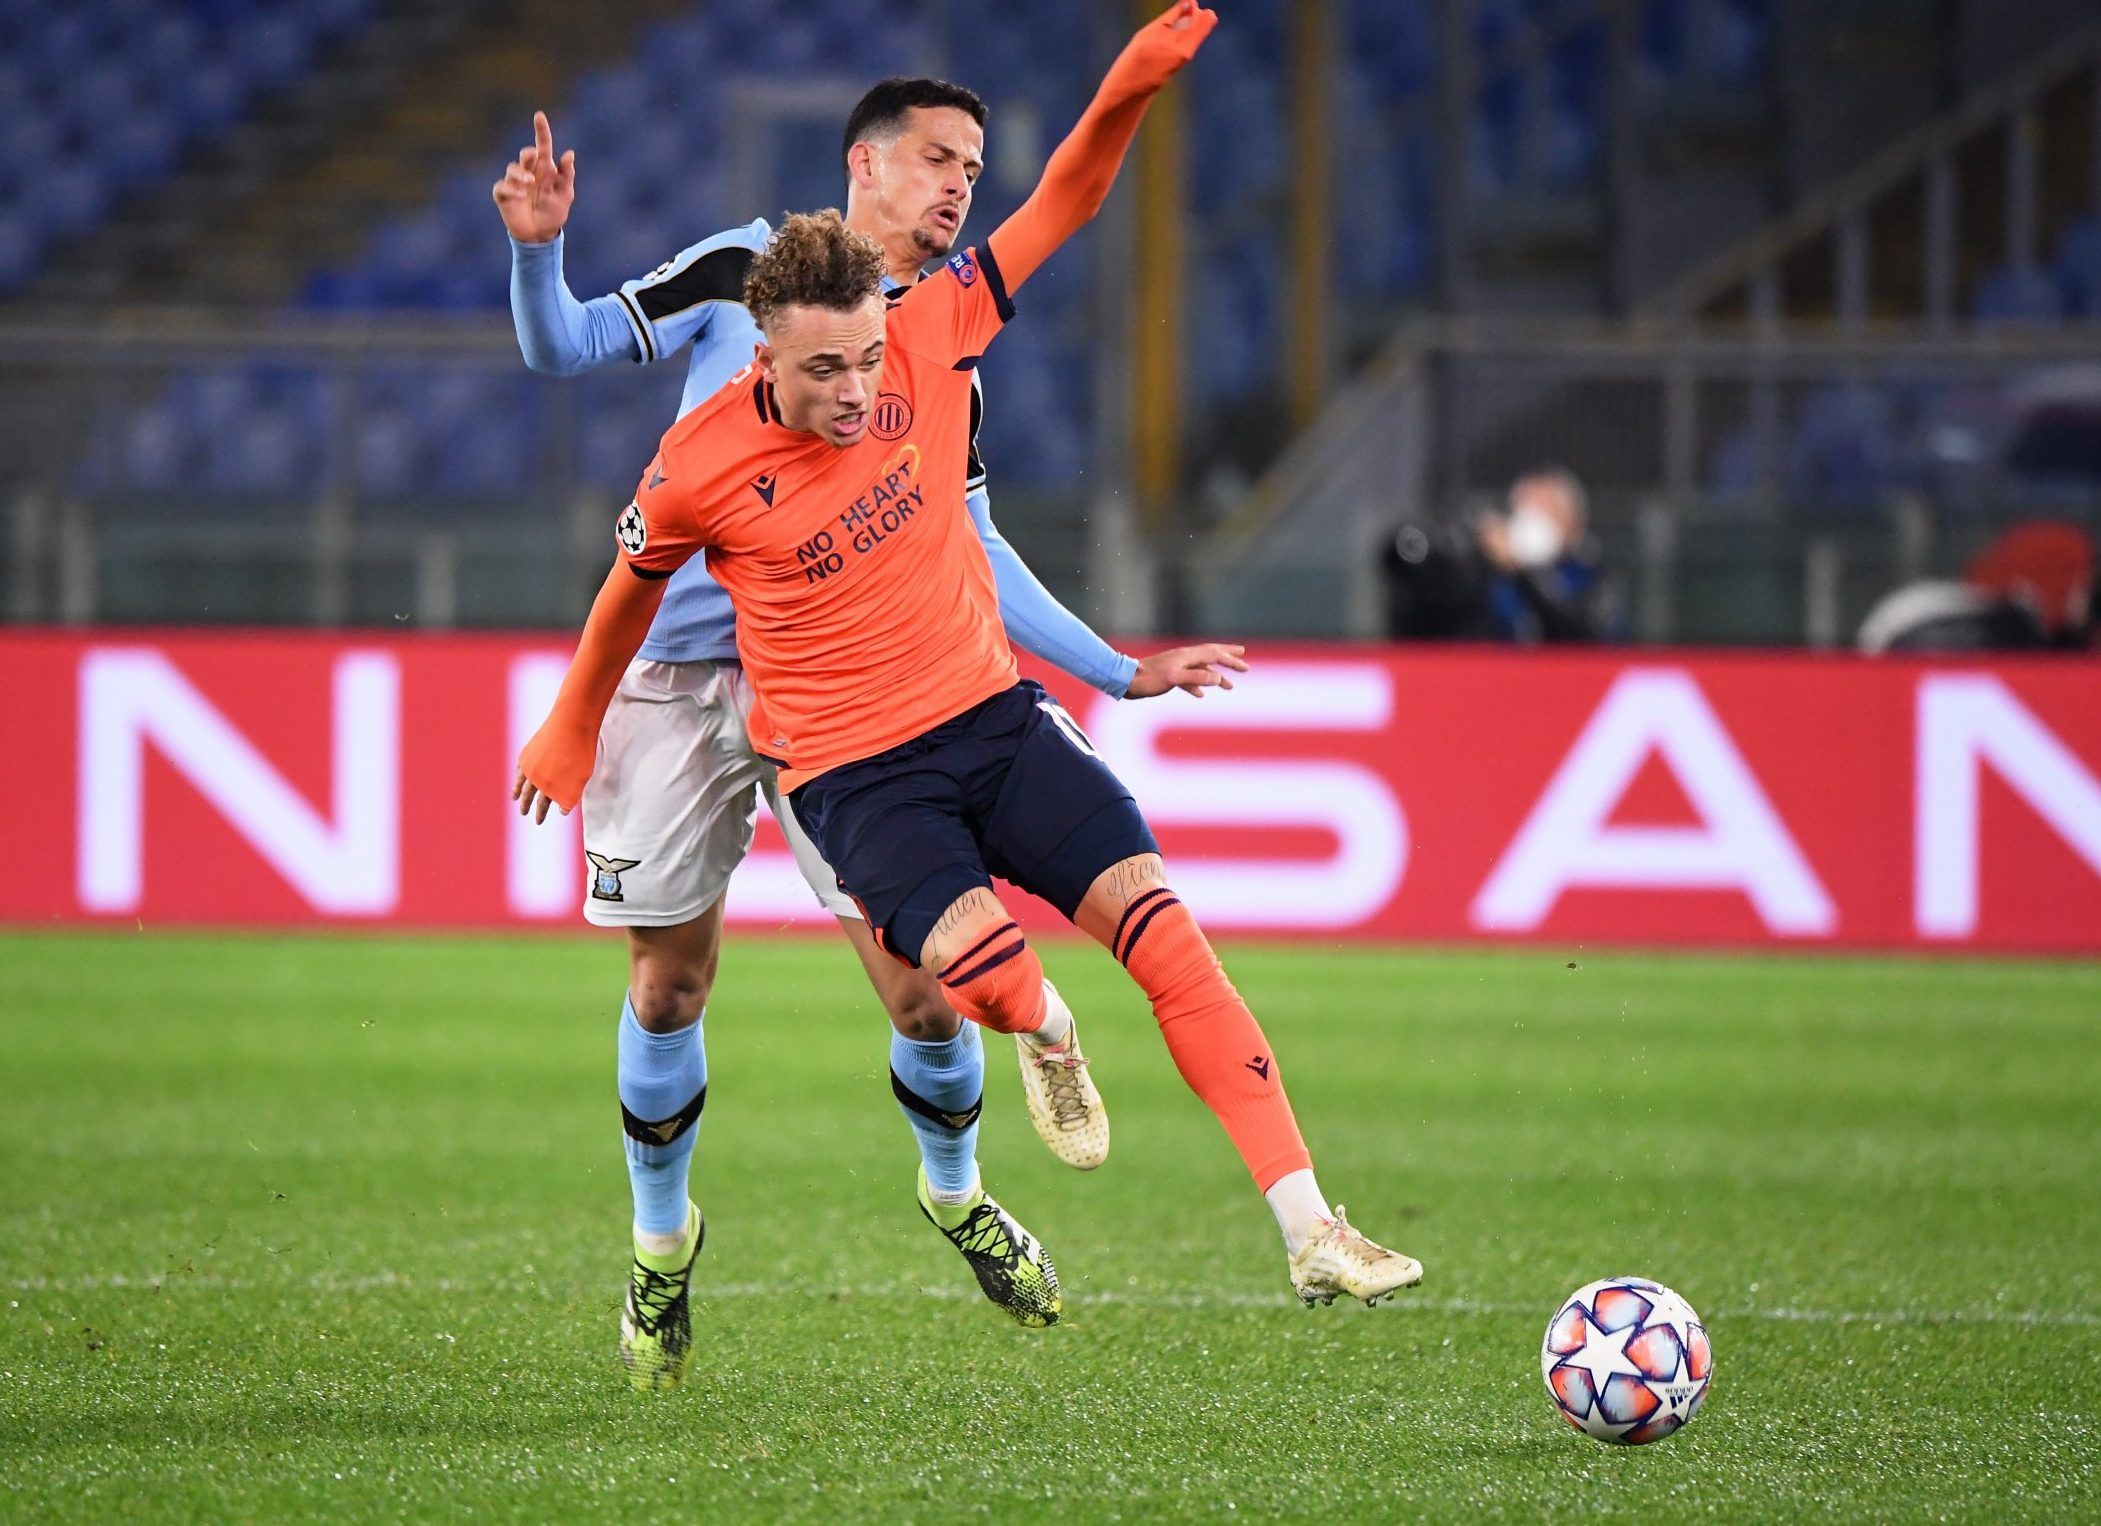 Club Brugge winger Noa Lang in action against Lazio in the Champions League